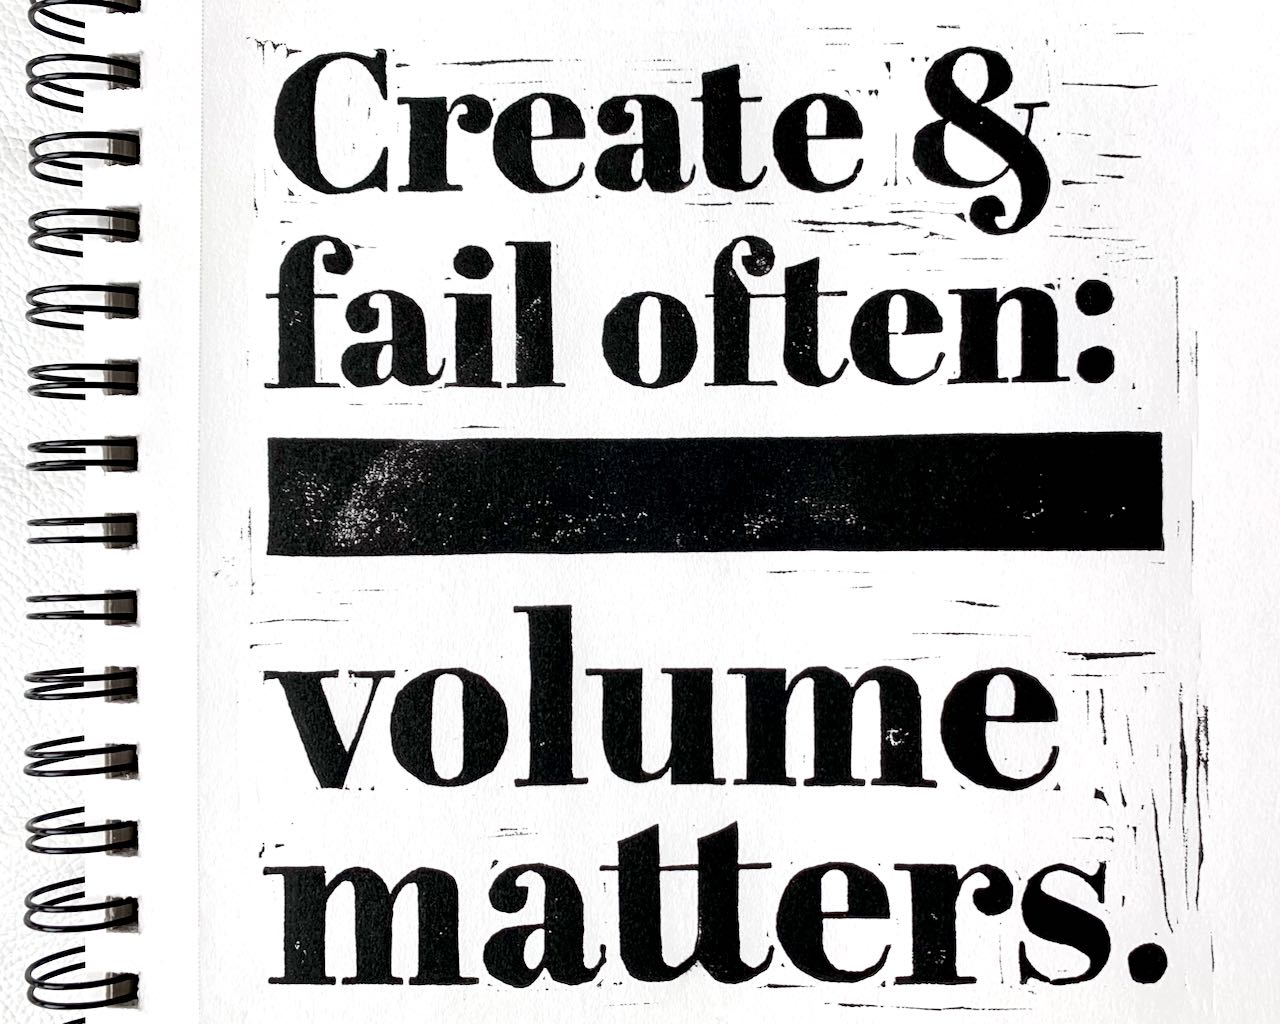 A blockprint in black ink on a white sketchbook, proclaiming in large serif font: Create and fail often - volume matters.